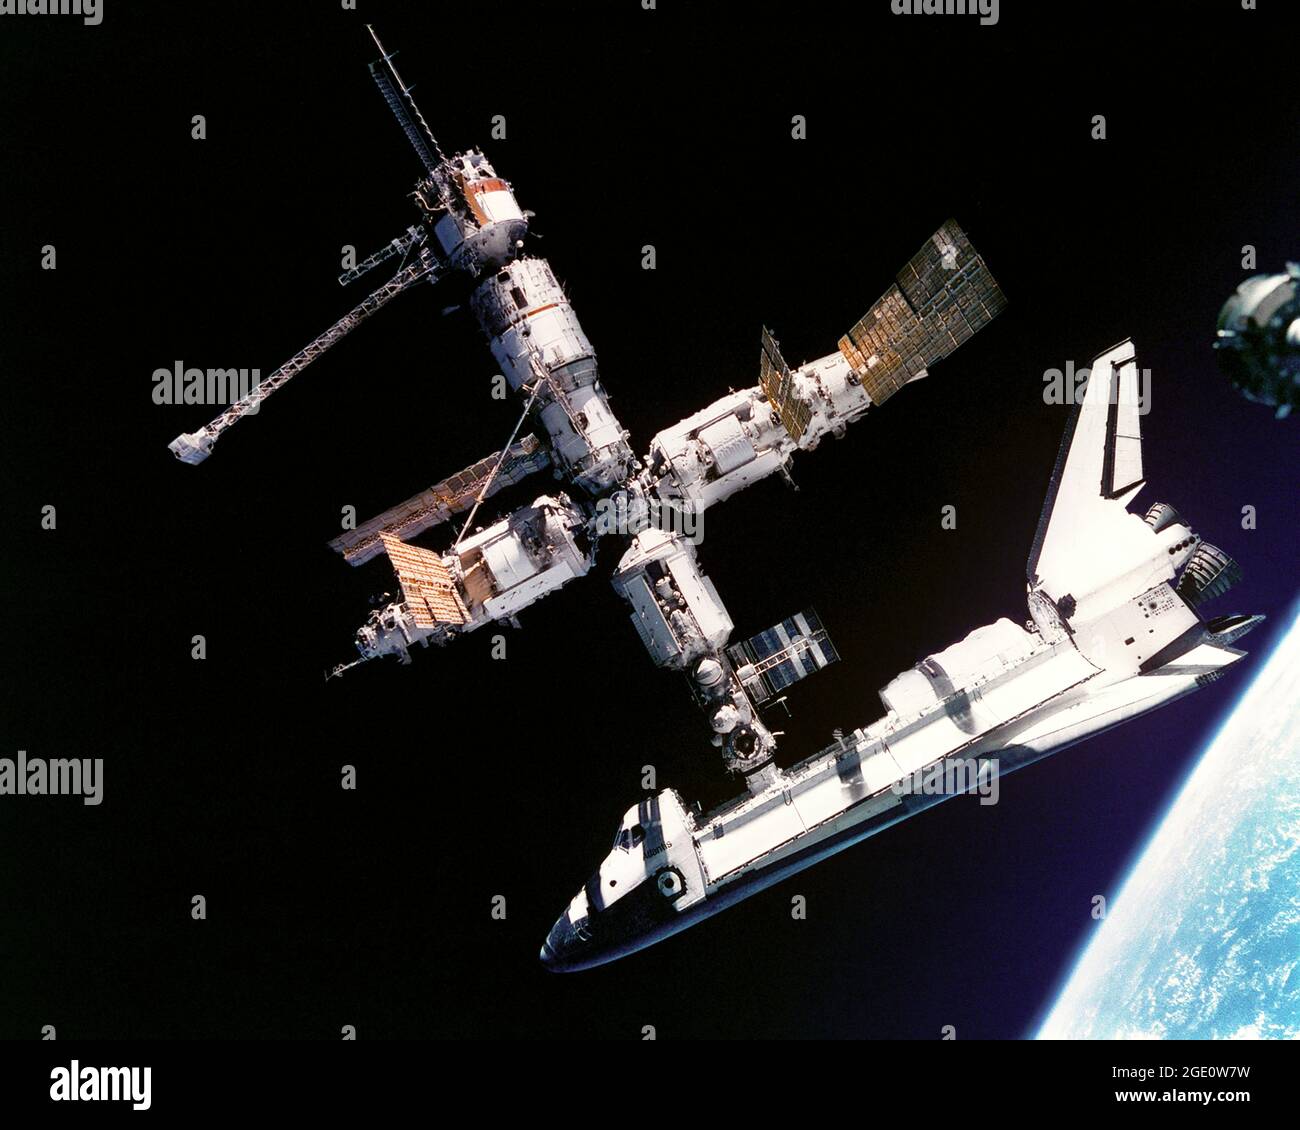 This view of the Space Shuttle Atlantis still connected to Russia's Mir Space Station was photographed by the Mir-19 crew on July 4, 1995. Cosmonauts Anatoliy Y. Solovyev and Nikolai M. Budarin, Mir-19 Commander and Flight Engineer, respectively, temporarily undocked the Soyuz spacecraft from the cluster of Mir elements to perform a brief fly-around. They took pictures while the STS-71 crew, with Mir-18's three crew members aboard, undocked Atlantis for the completion of this leg of the joint activities. Solovyev and Budarin had been taxied to the Mir Space Station by the STS-71. Stock Photo